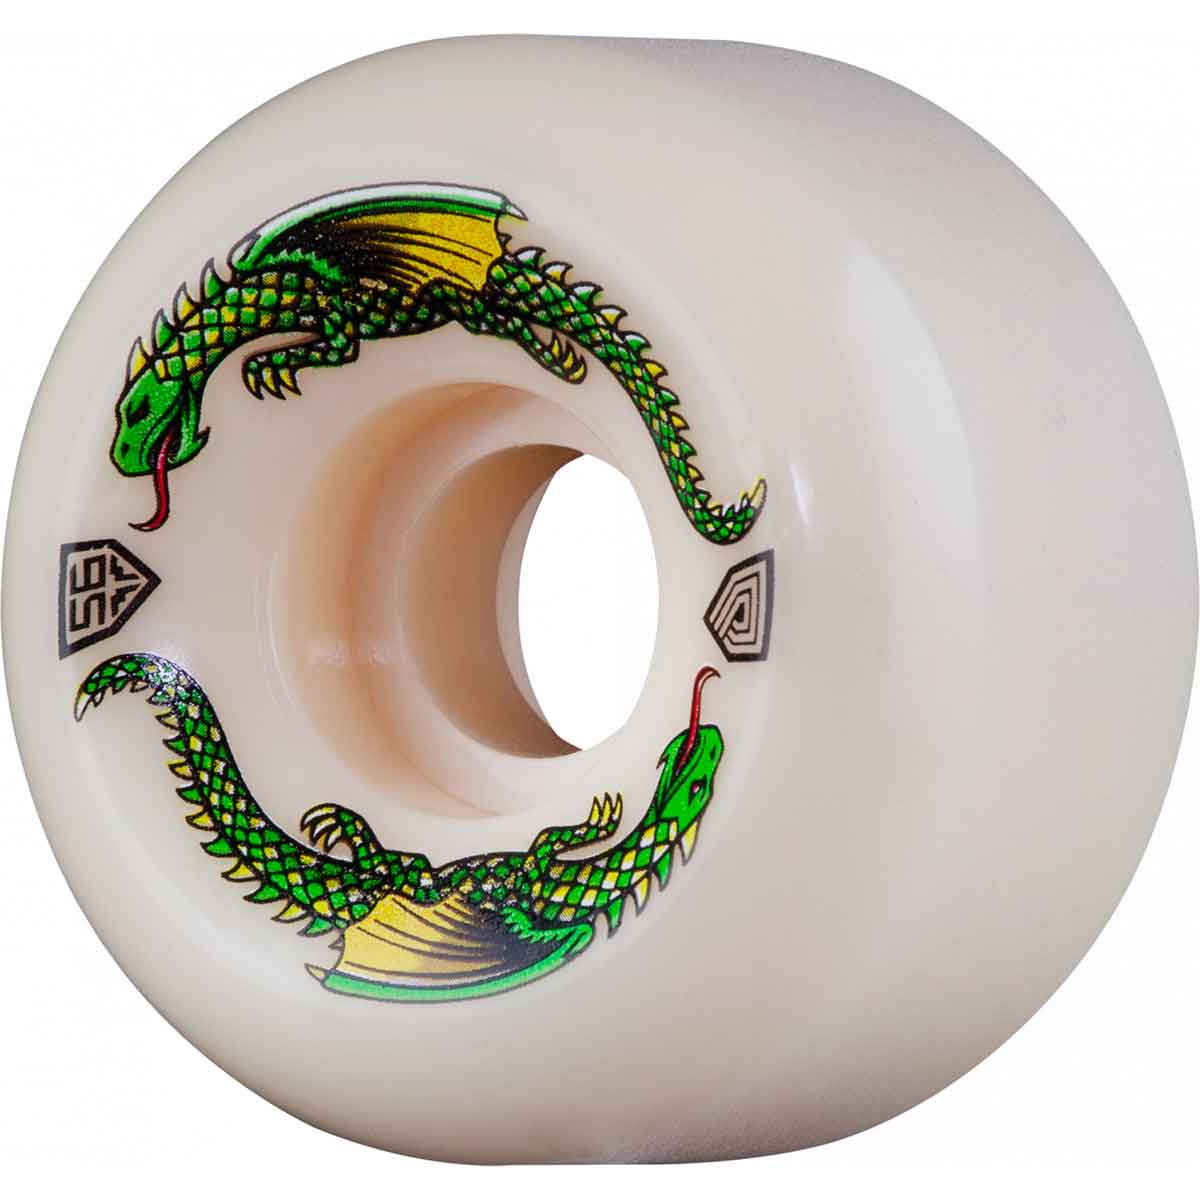 Powell Peralta Dragon Formula Green Dragon 56mm 93a Wheels. Skate the amazing new urethane formula from Powell Peralta. Free N.Z shipping on orders over $100. Pavement skate shop, Dunedin.